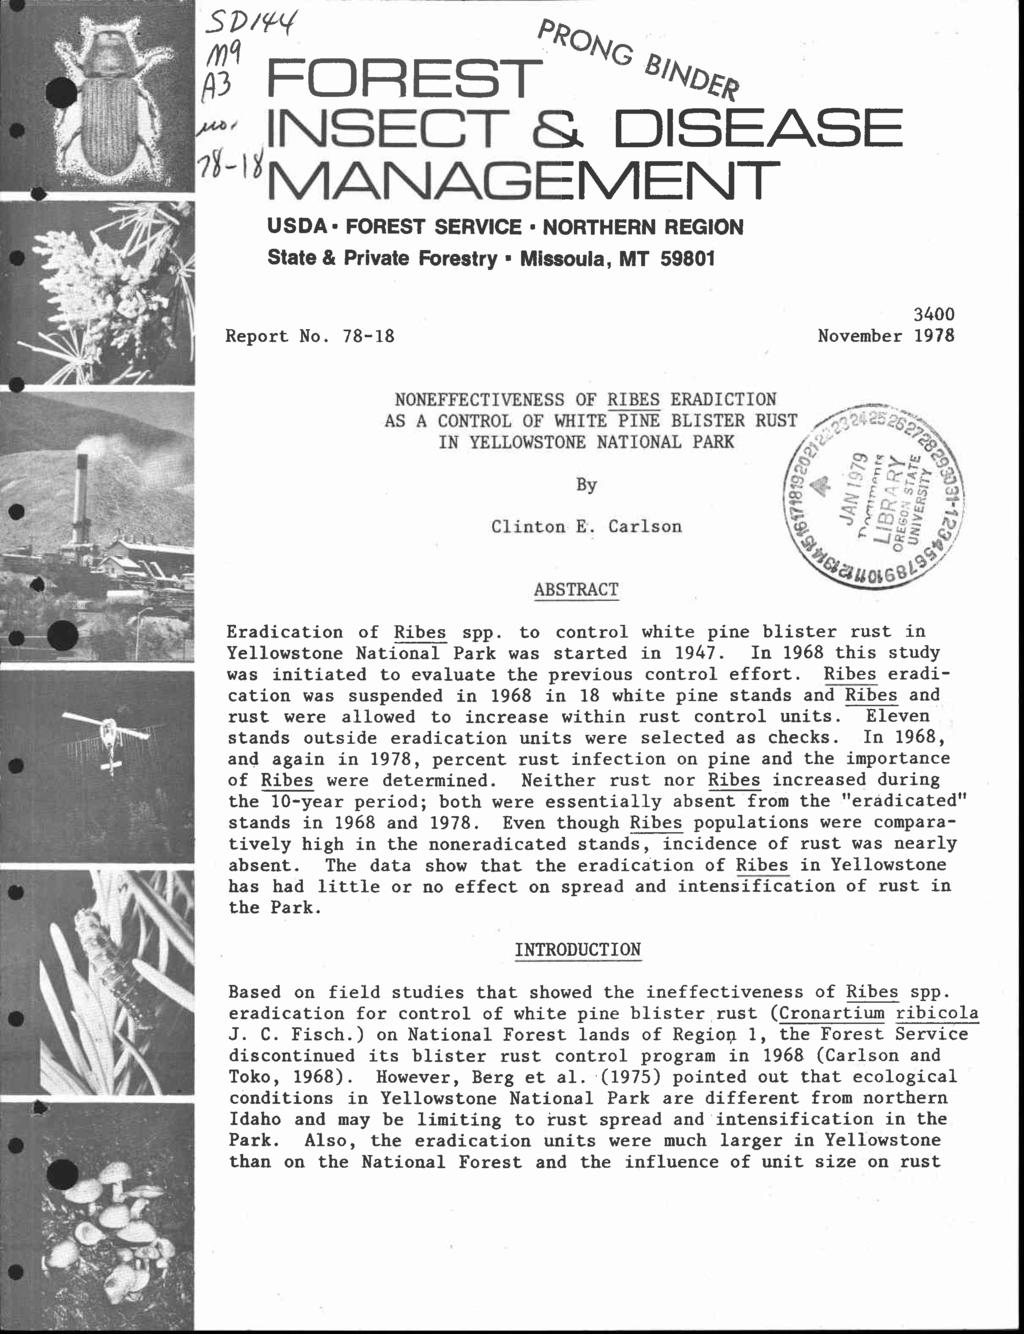 spiclq PRONG FOREST 'Alpo INSECT S. DISEASE 'MANAGEMENT A3 USDA FOREST SERVICE NORTHERN REGION State & Private Forestry Missoula, MT 59801 3400 November 1978 Report No.